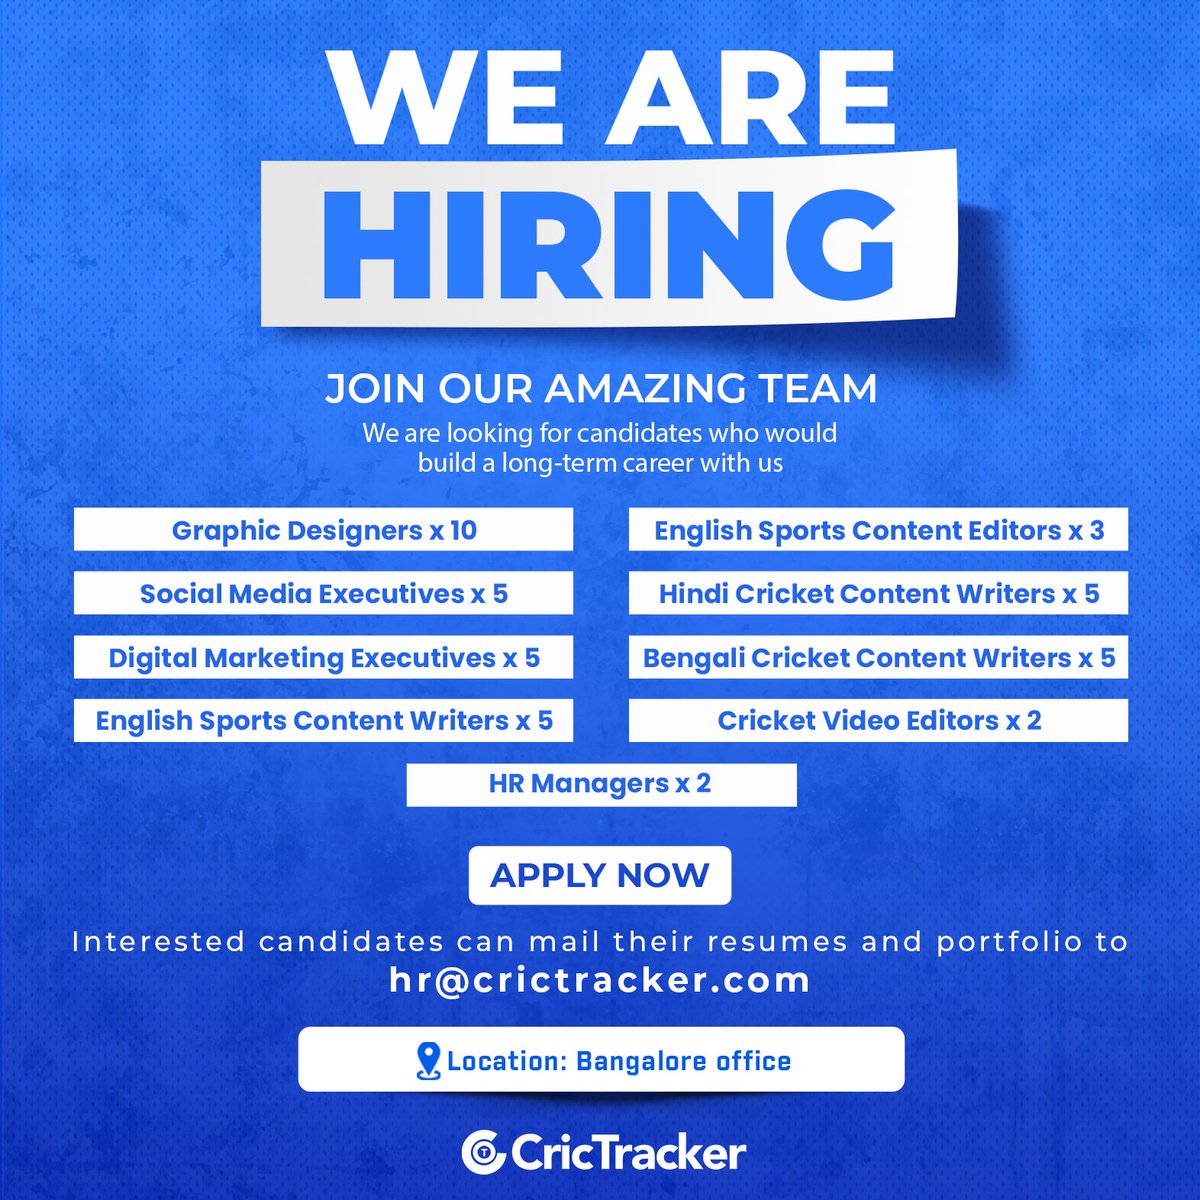 📢CricTracker is hiring 📢

Any interested candidates can mail 📩 their resumes and samples to 𝐡𝐫@𝐜𝐫𝐢𝐜𝐭𝐫𝐚𝐜𝐤𝐞𝐫.𝐜𝐨𝐦✍️

Location📍: Bangalore

#CricTracker #Bangalore #Cricket #CricketJobs